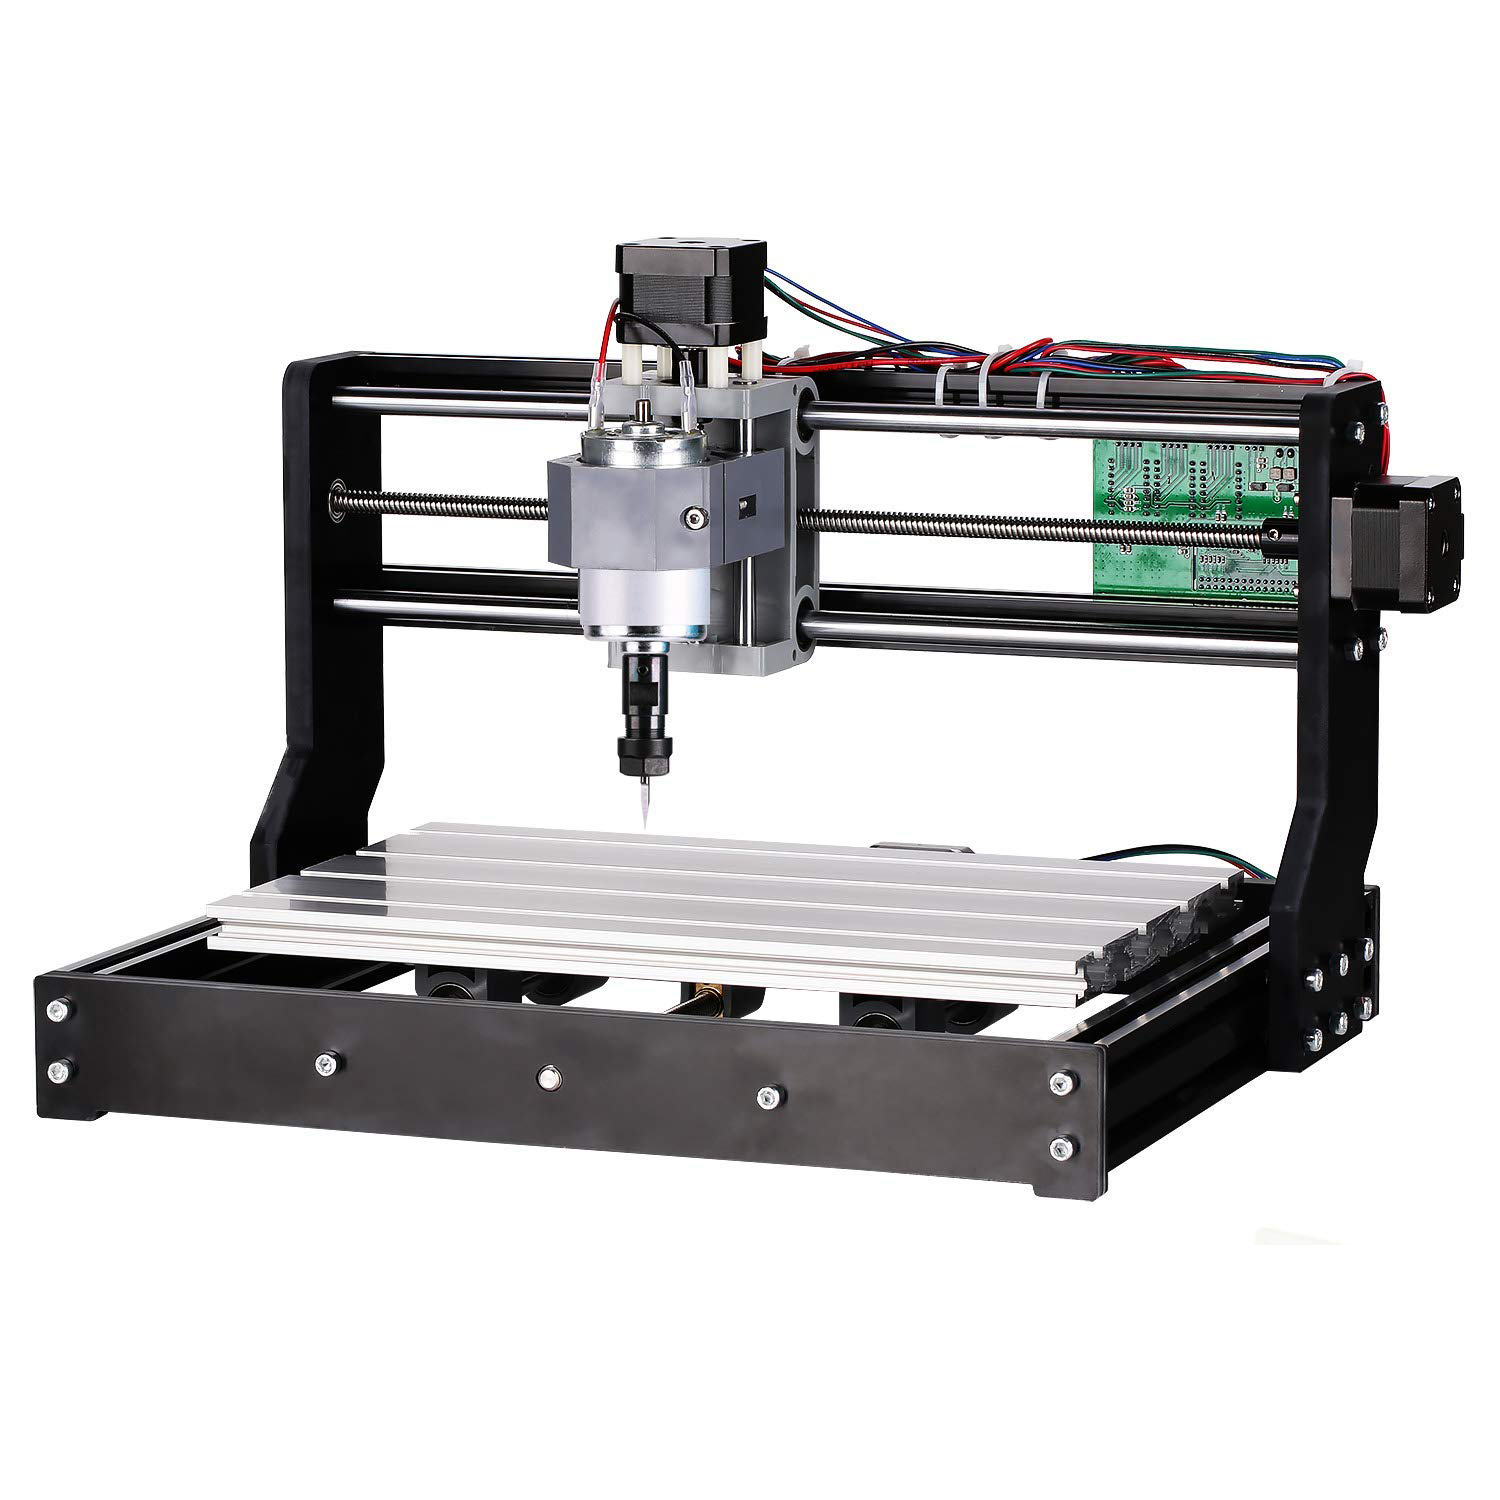 Fanrsquoensheng-3018-Pro-3-Axis-Mini-DIY-CNC-Router-Adjustable-Speed-Spindle-Motor-Wood-Engraving-Ma-1463876-5